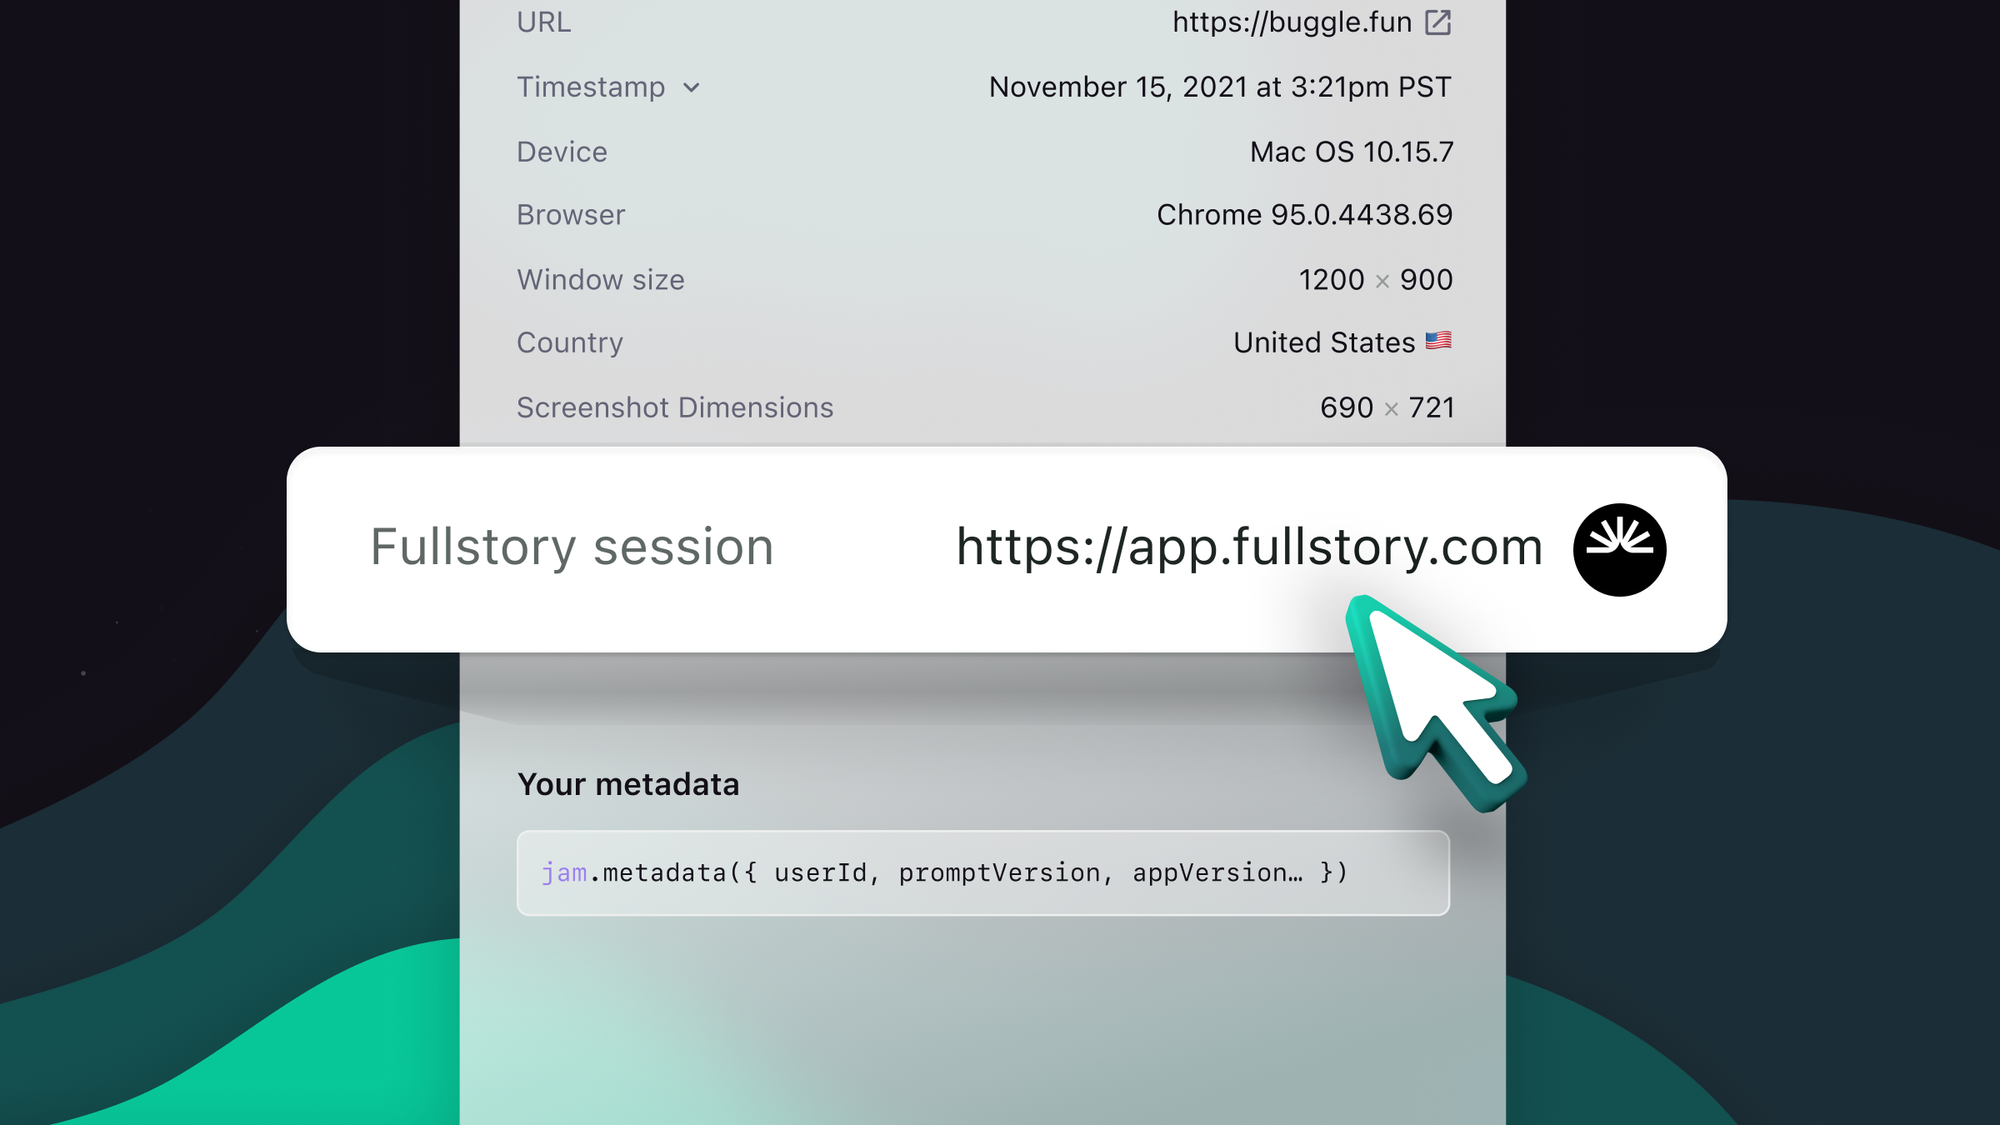 Just launched! Even more debug details auto-included with Jam + Fullstory